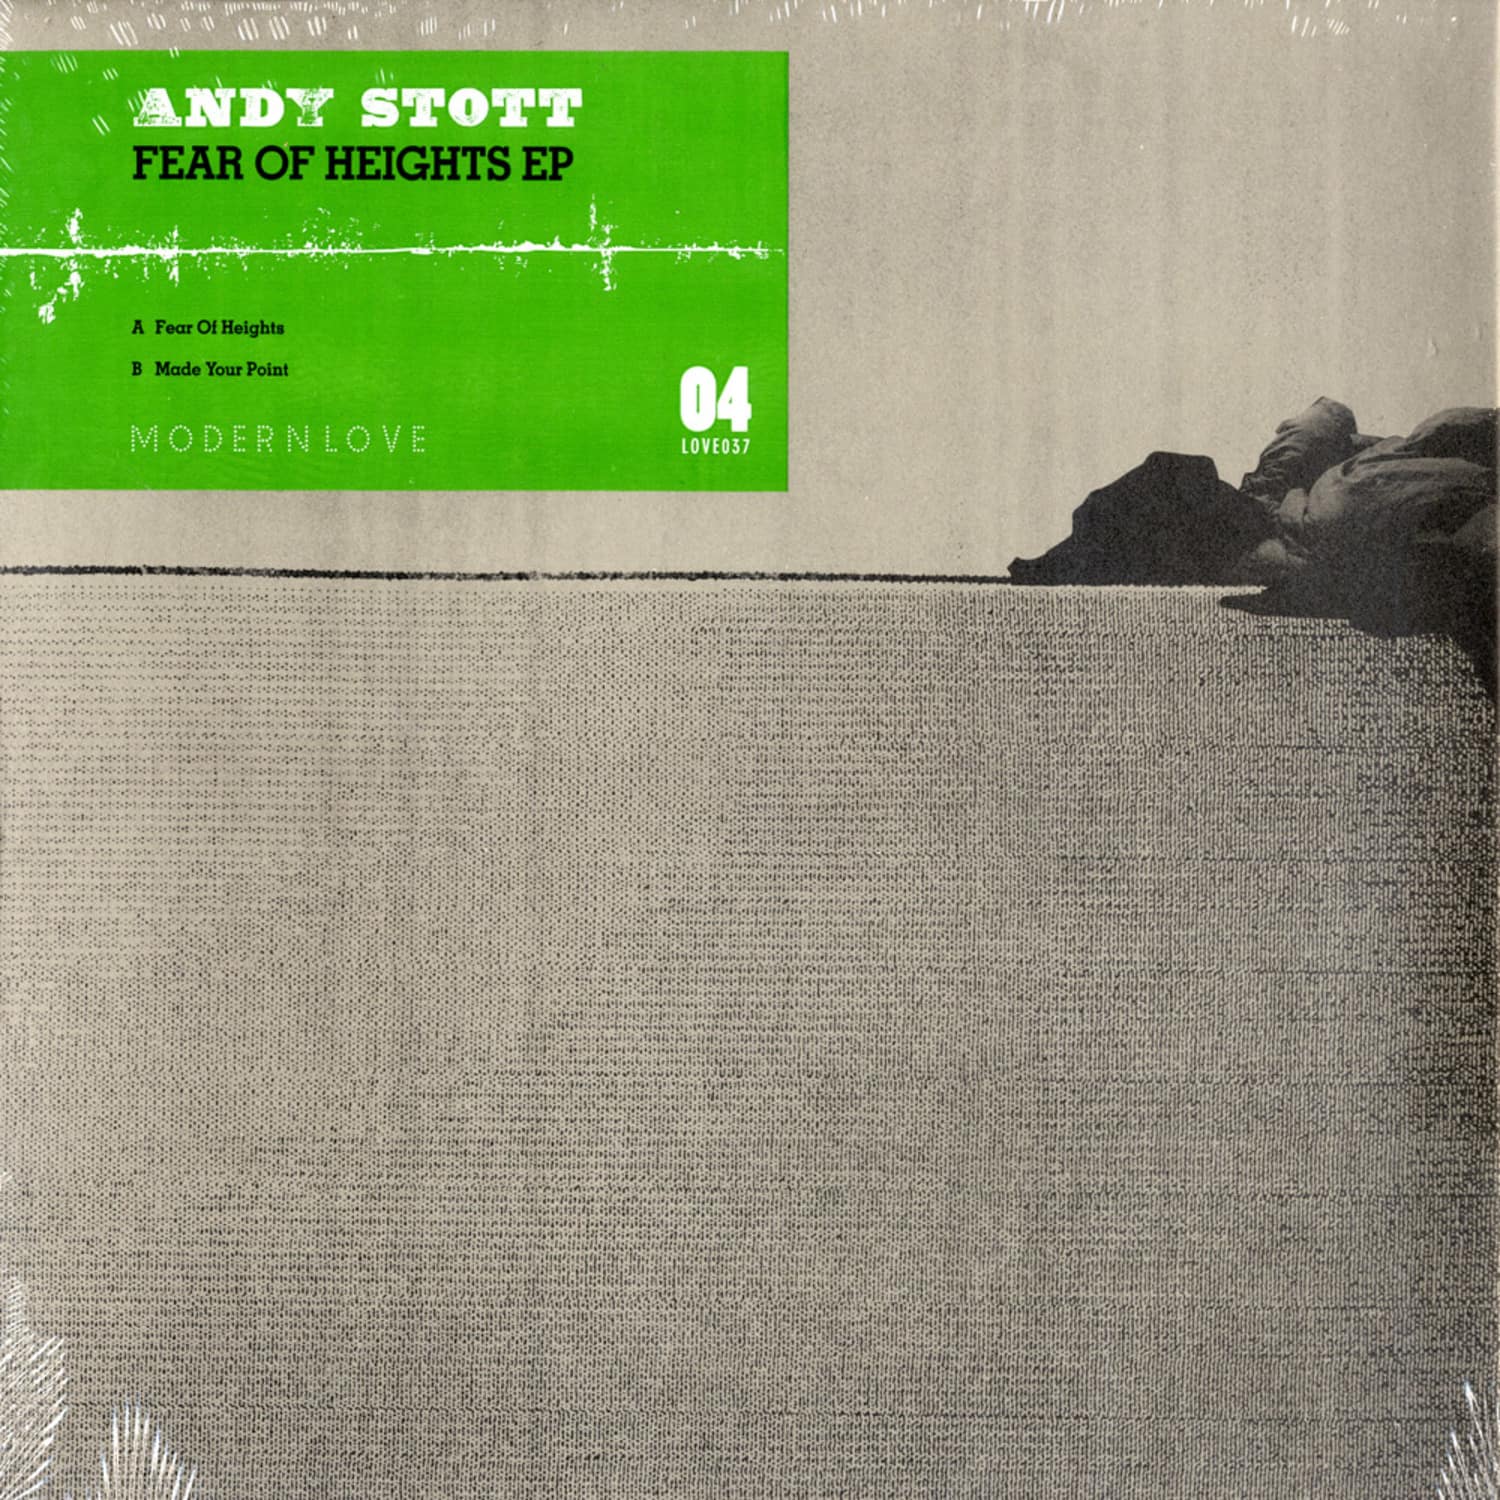 Andy Stott - FEAR OF HEIGHTS